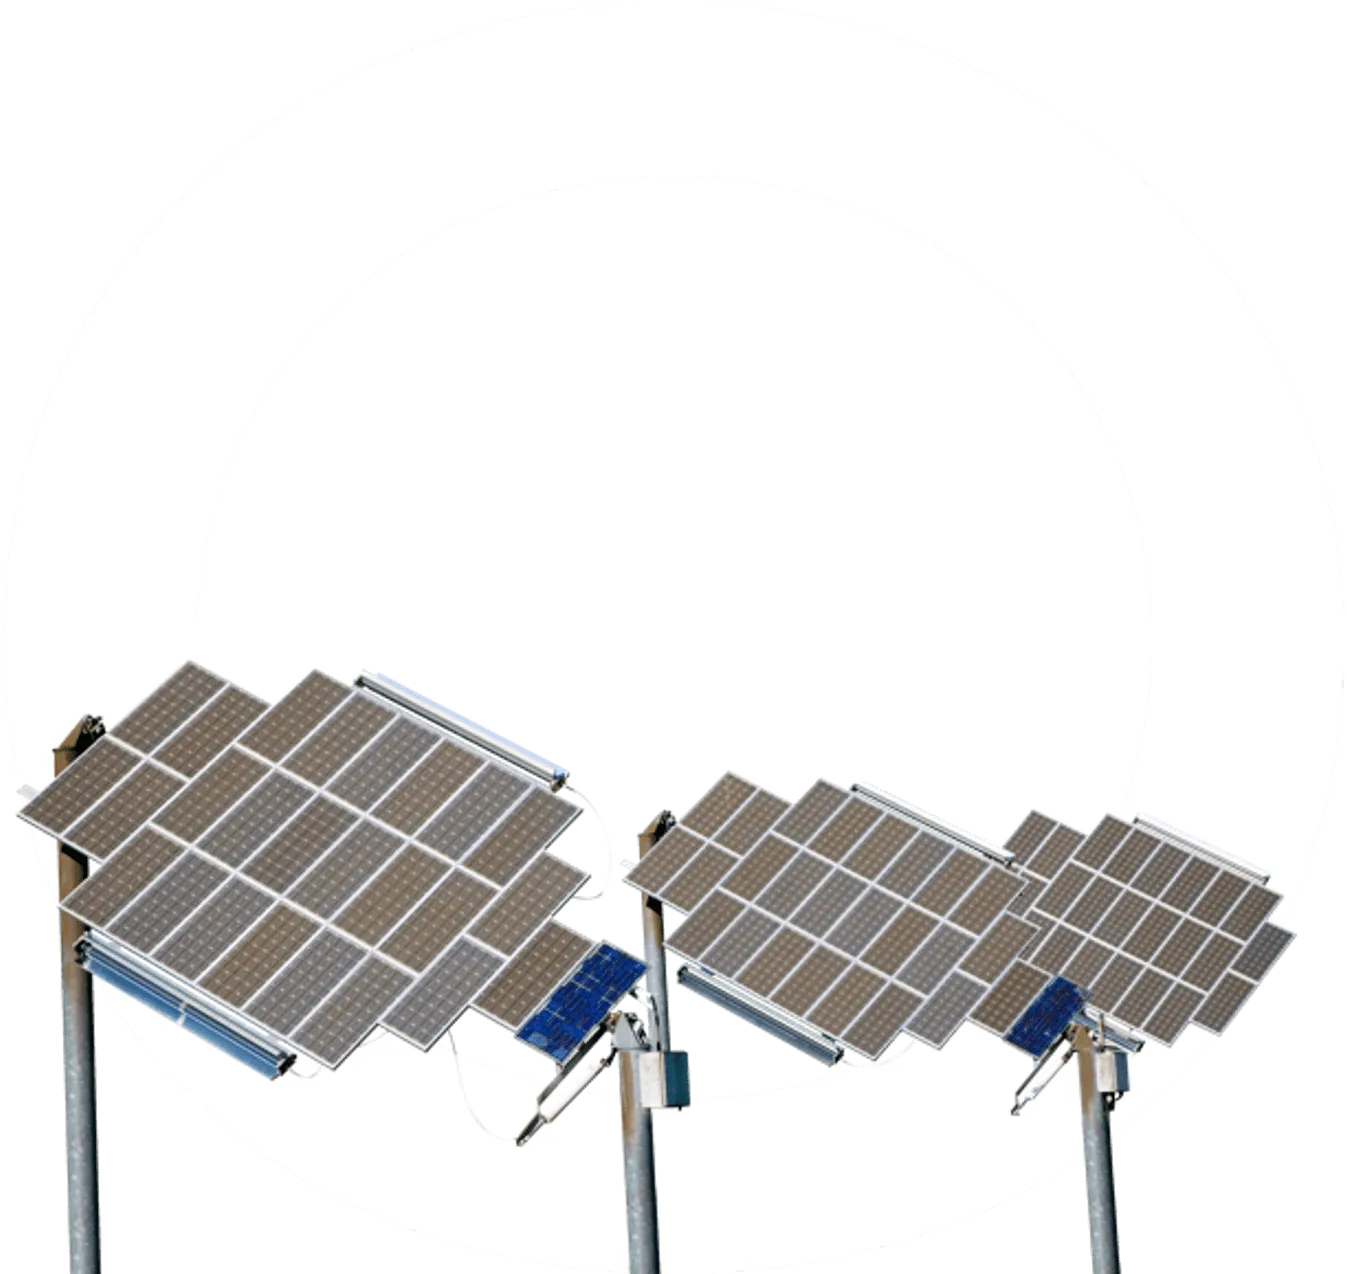 O amplifier graphic with solar panels overlaid